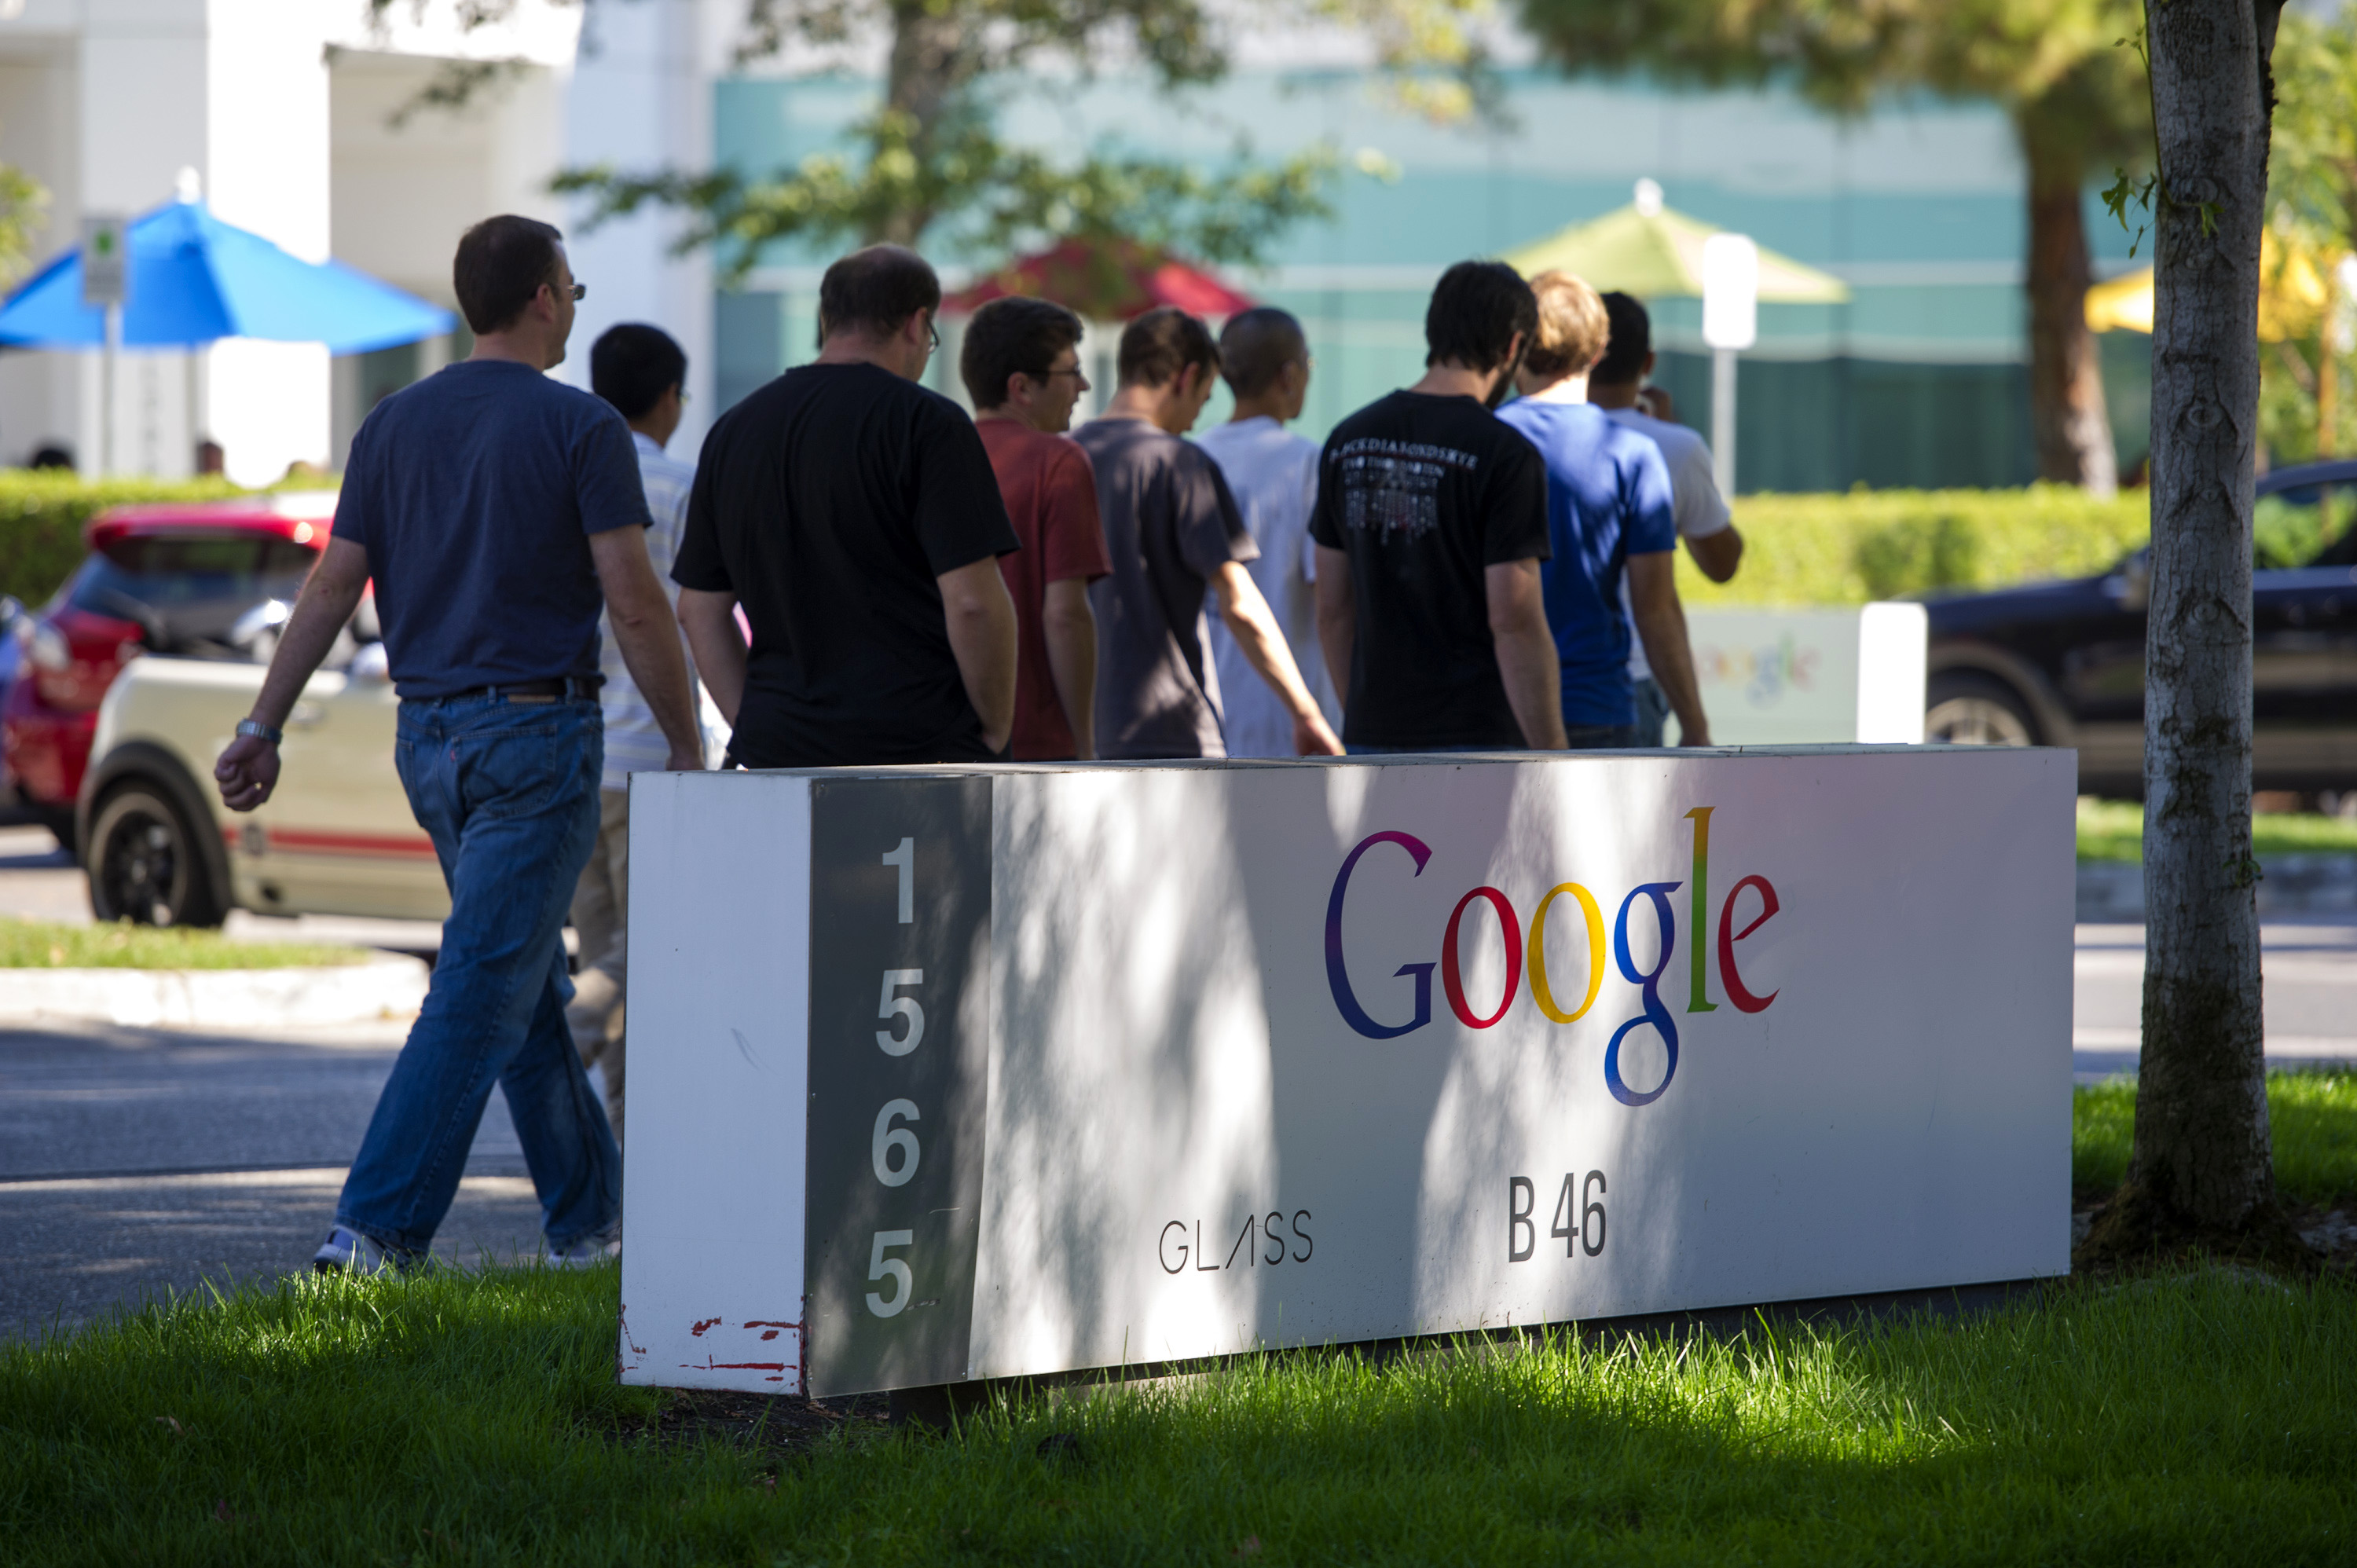 Pedestrians walk past Google Inc. signage displayed in front of the company's headquarters in Mountain View, California, U.S., on Friday, Sept. 27, 2013. (David Paul Morris—Bloomberg / Getty Images)